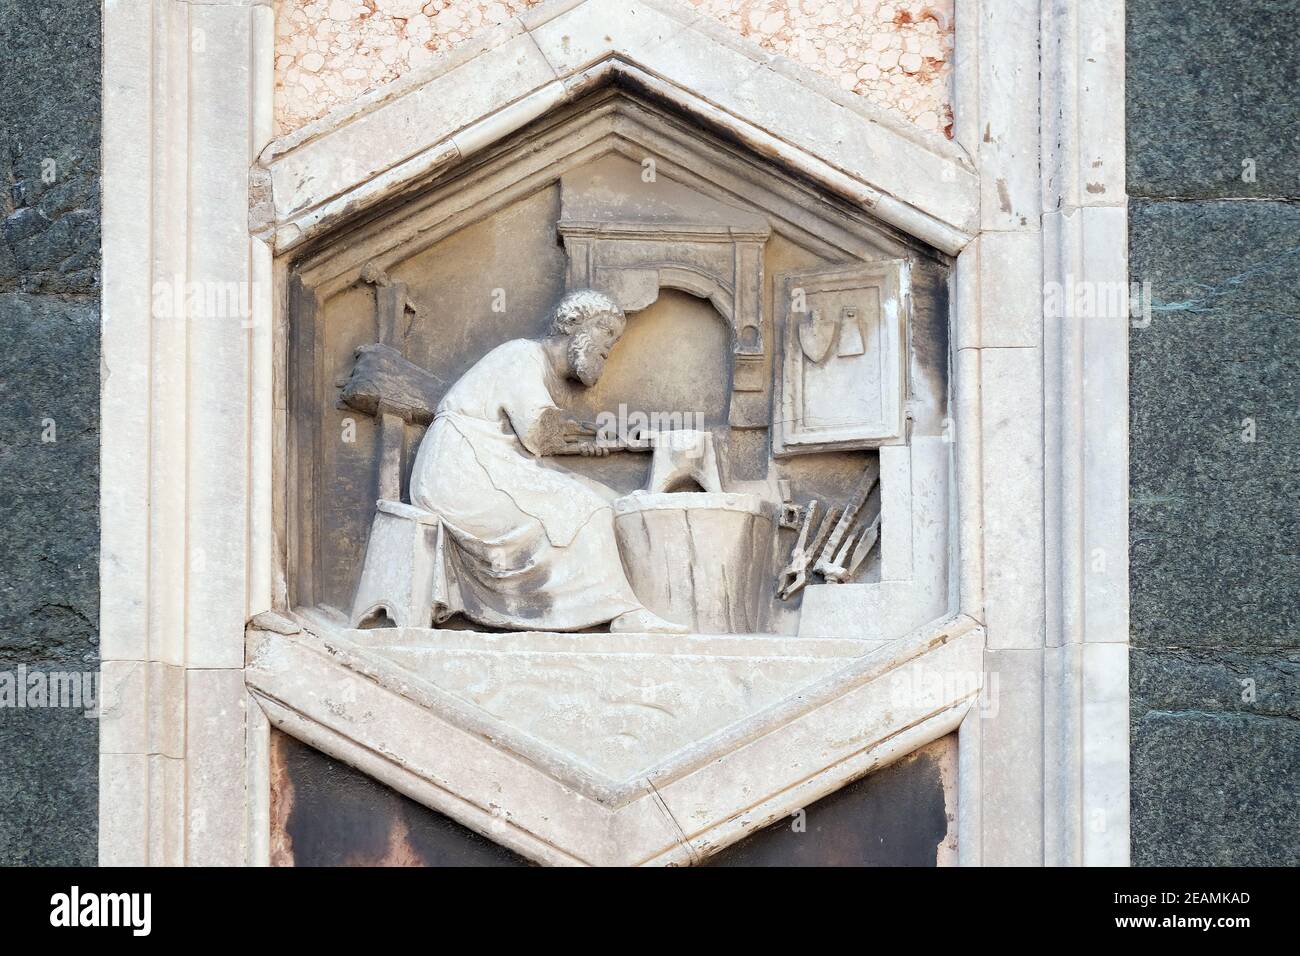 Tubalcain by Nino Pisano, 1334-36., Relief on Giotto Campanile of Cattedrale di Santa Maria del Fiore (Cathedral of Saint Mary of the Flower), Florence, Italy Stock Photo